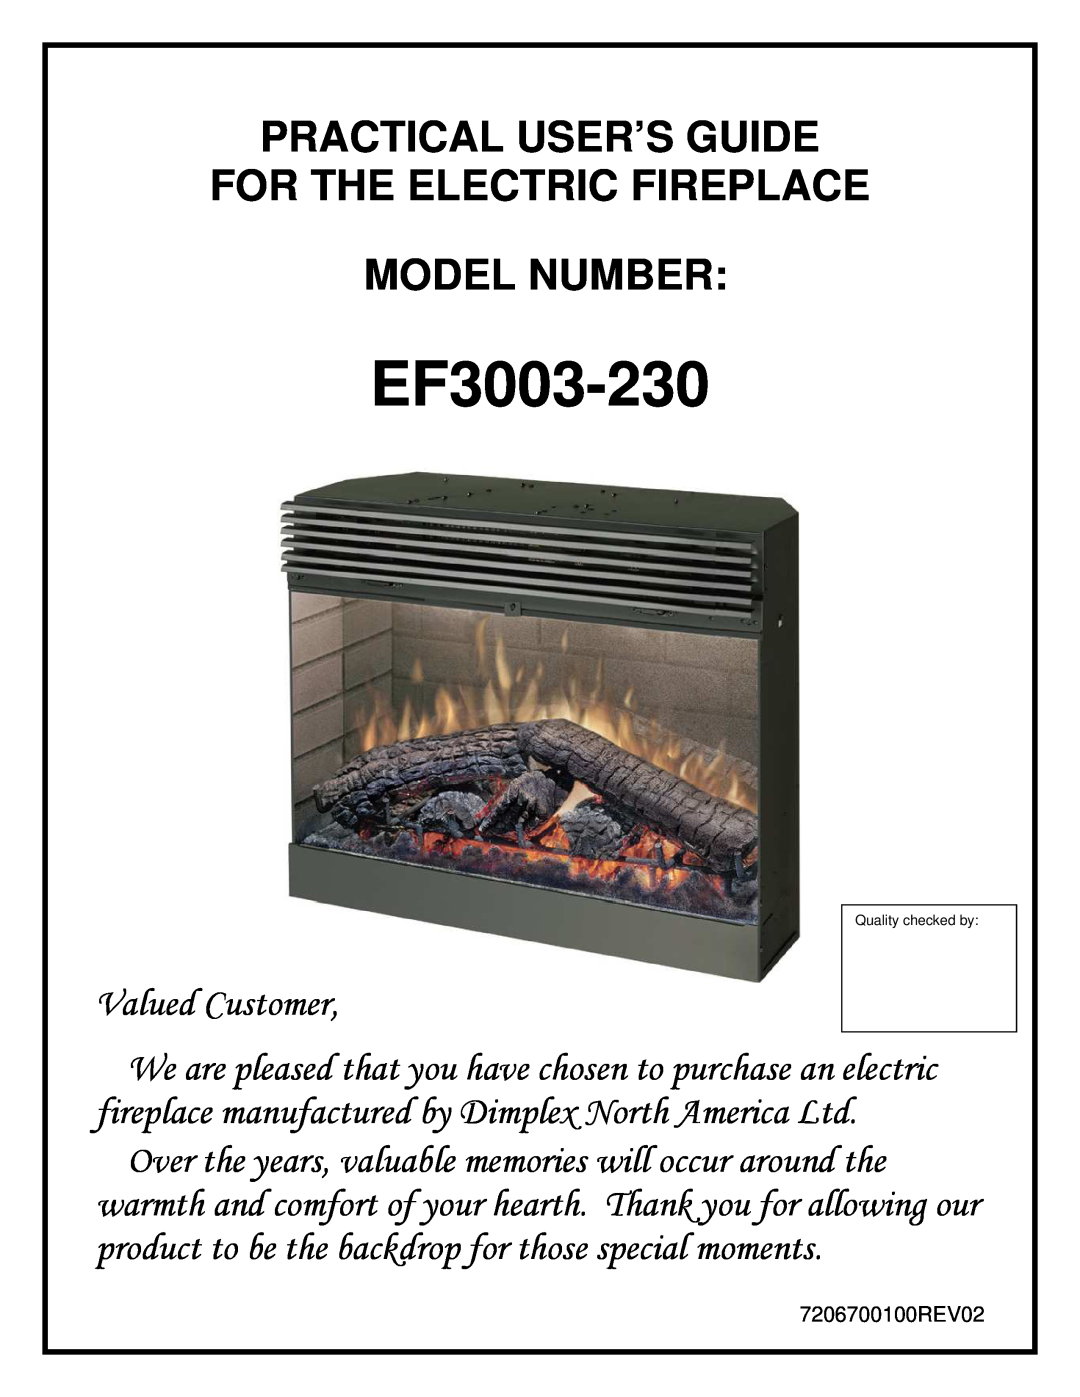 Dimplex EF3003-230 manual Practical User’S Guide For The Electric Fireplace, Model Number 